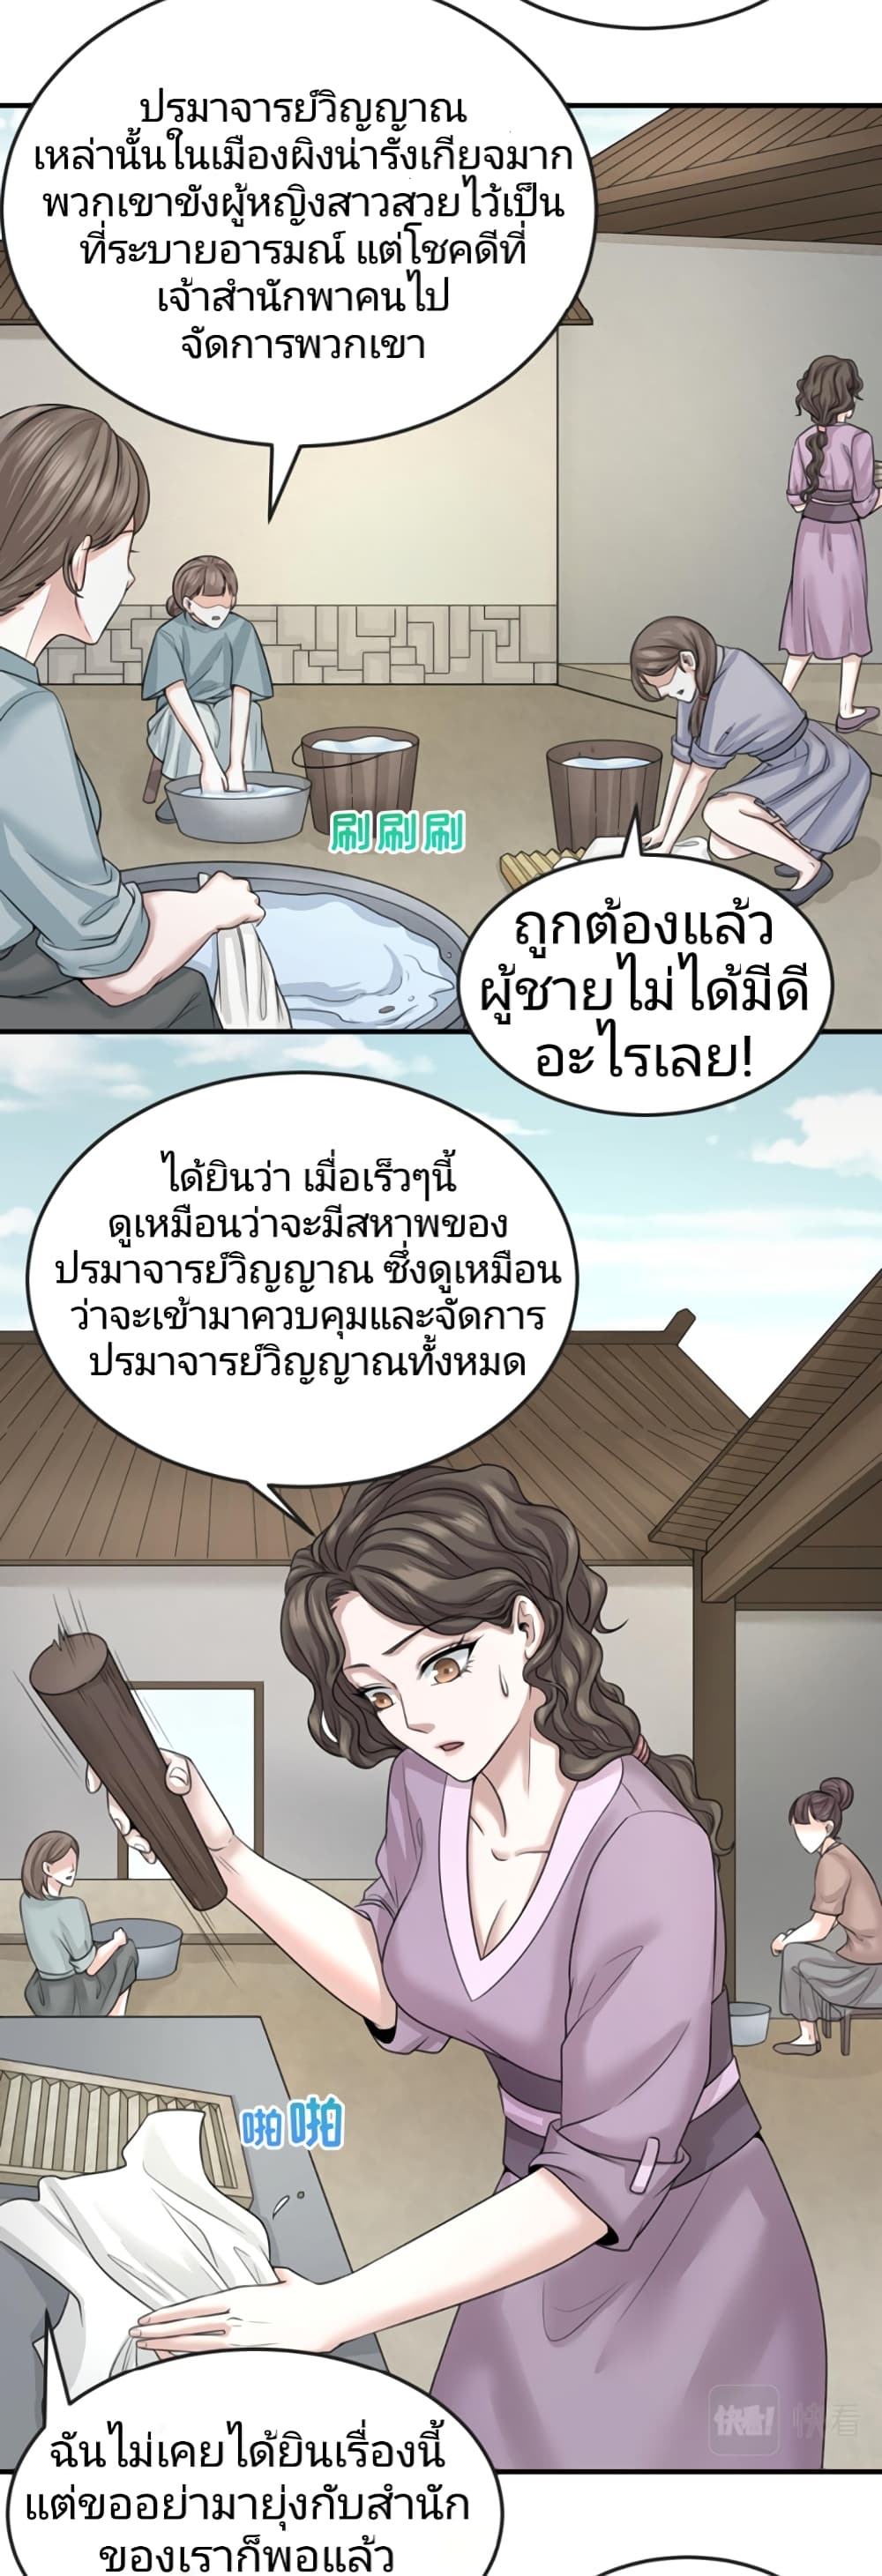 The Age of Ghost Spirits à¸à¸­à¸à¸à¸µà¹ 44 (16)